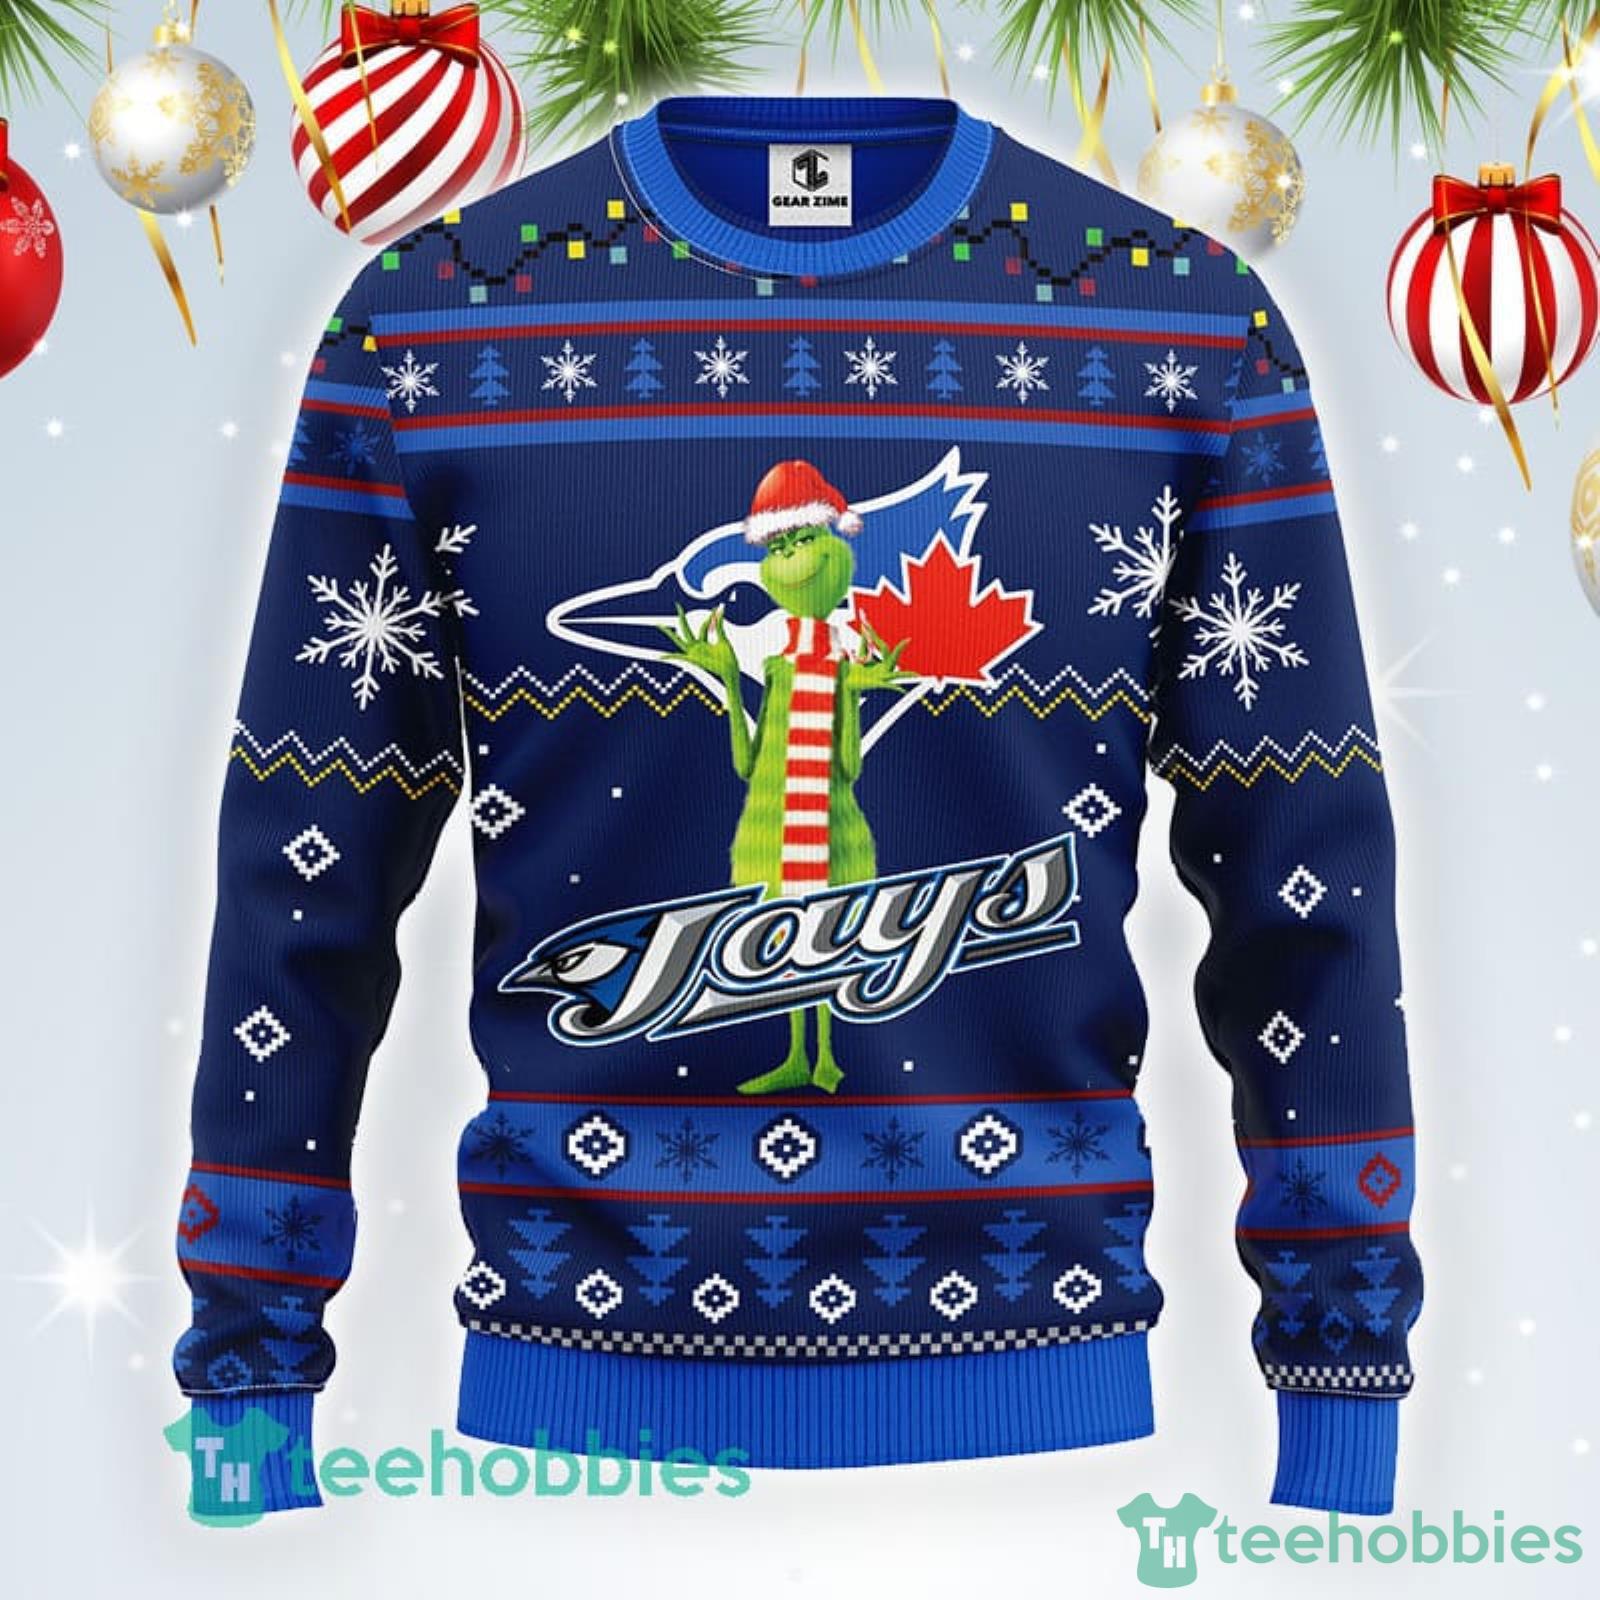 Toronto Blue Jays Merry Christmas To All And To Blue Jays A Good